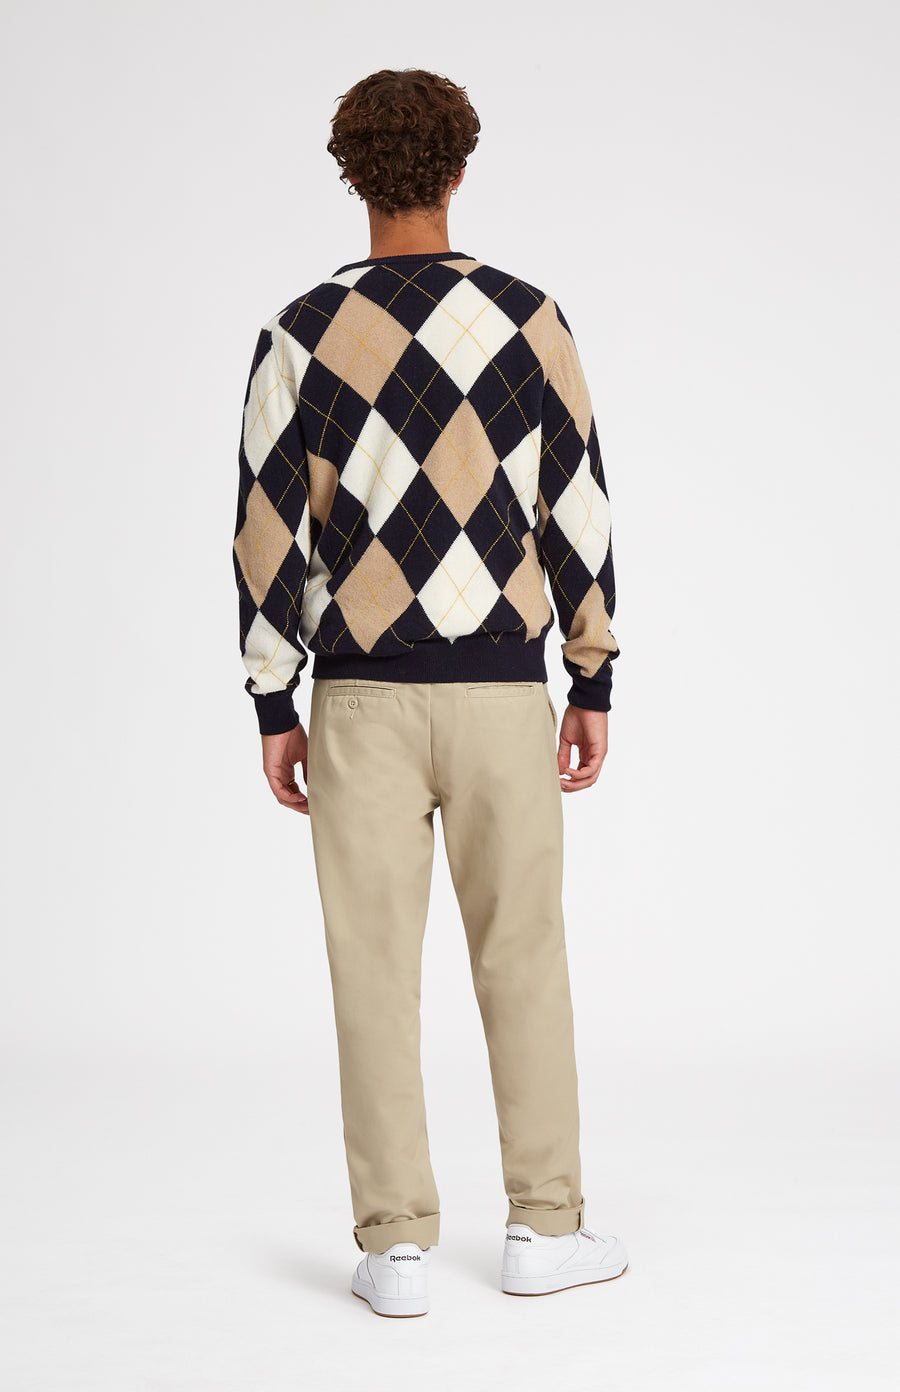 Heritage argyle golf jumper in Navy and Camel rear view - Pringle of Scotland 